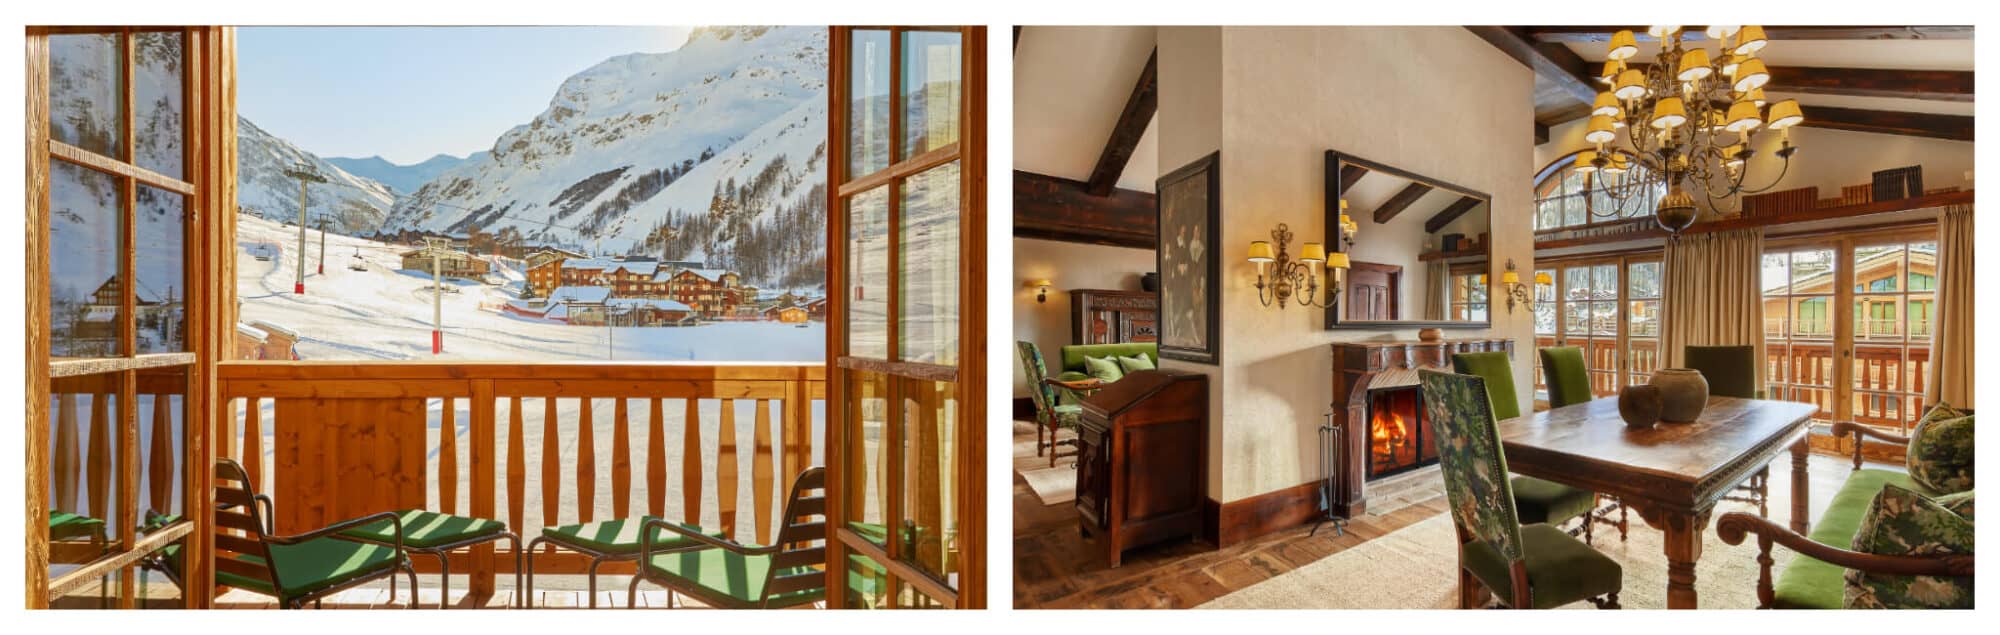 Left: The breathtaking view from a wooden balcony at Airelles ski resort, overlooking slopes with cable posts. Right: A dining area inside one of the rooms at Airelles, with wooden tables, green chairs, and a fireplace.